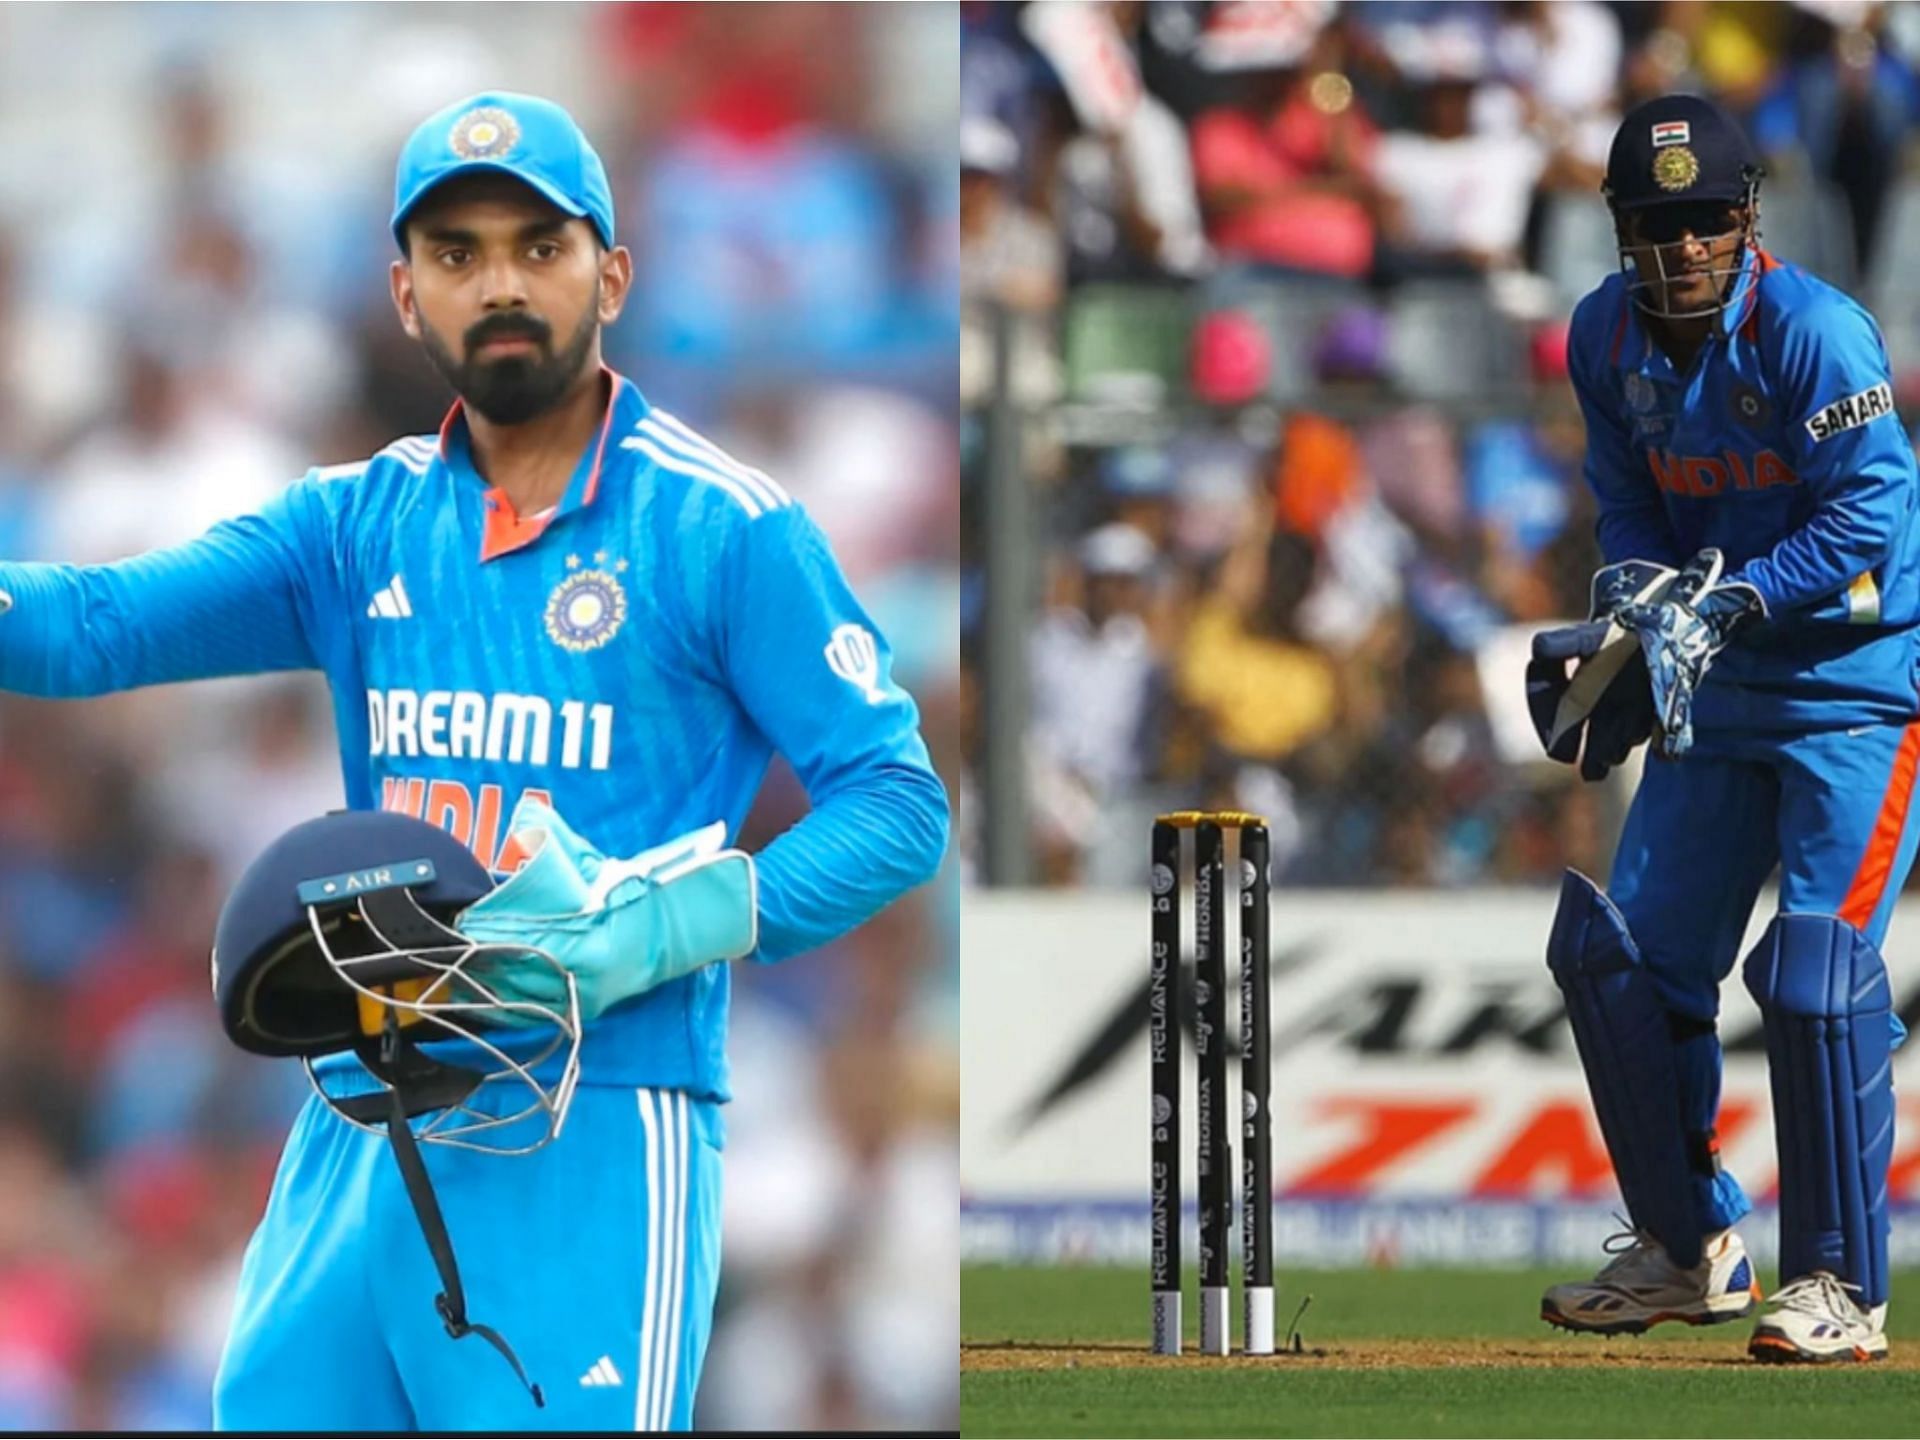 KL Rahul (L) and MS Dhoni (R) donning the wicket-keeping role [Getty Images]